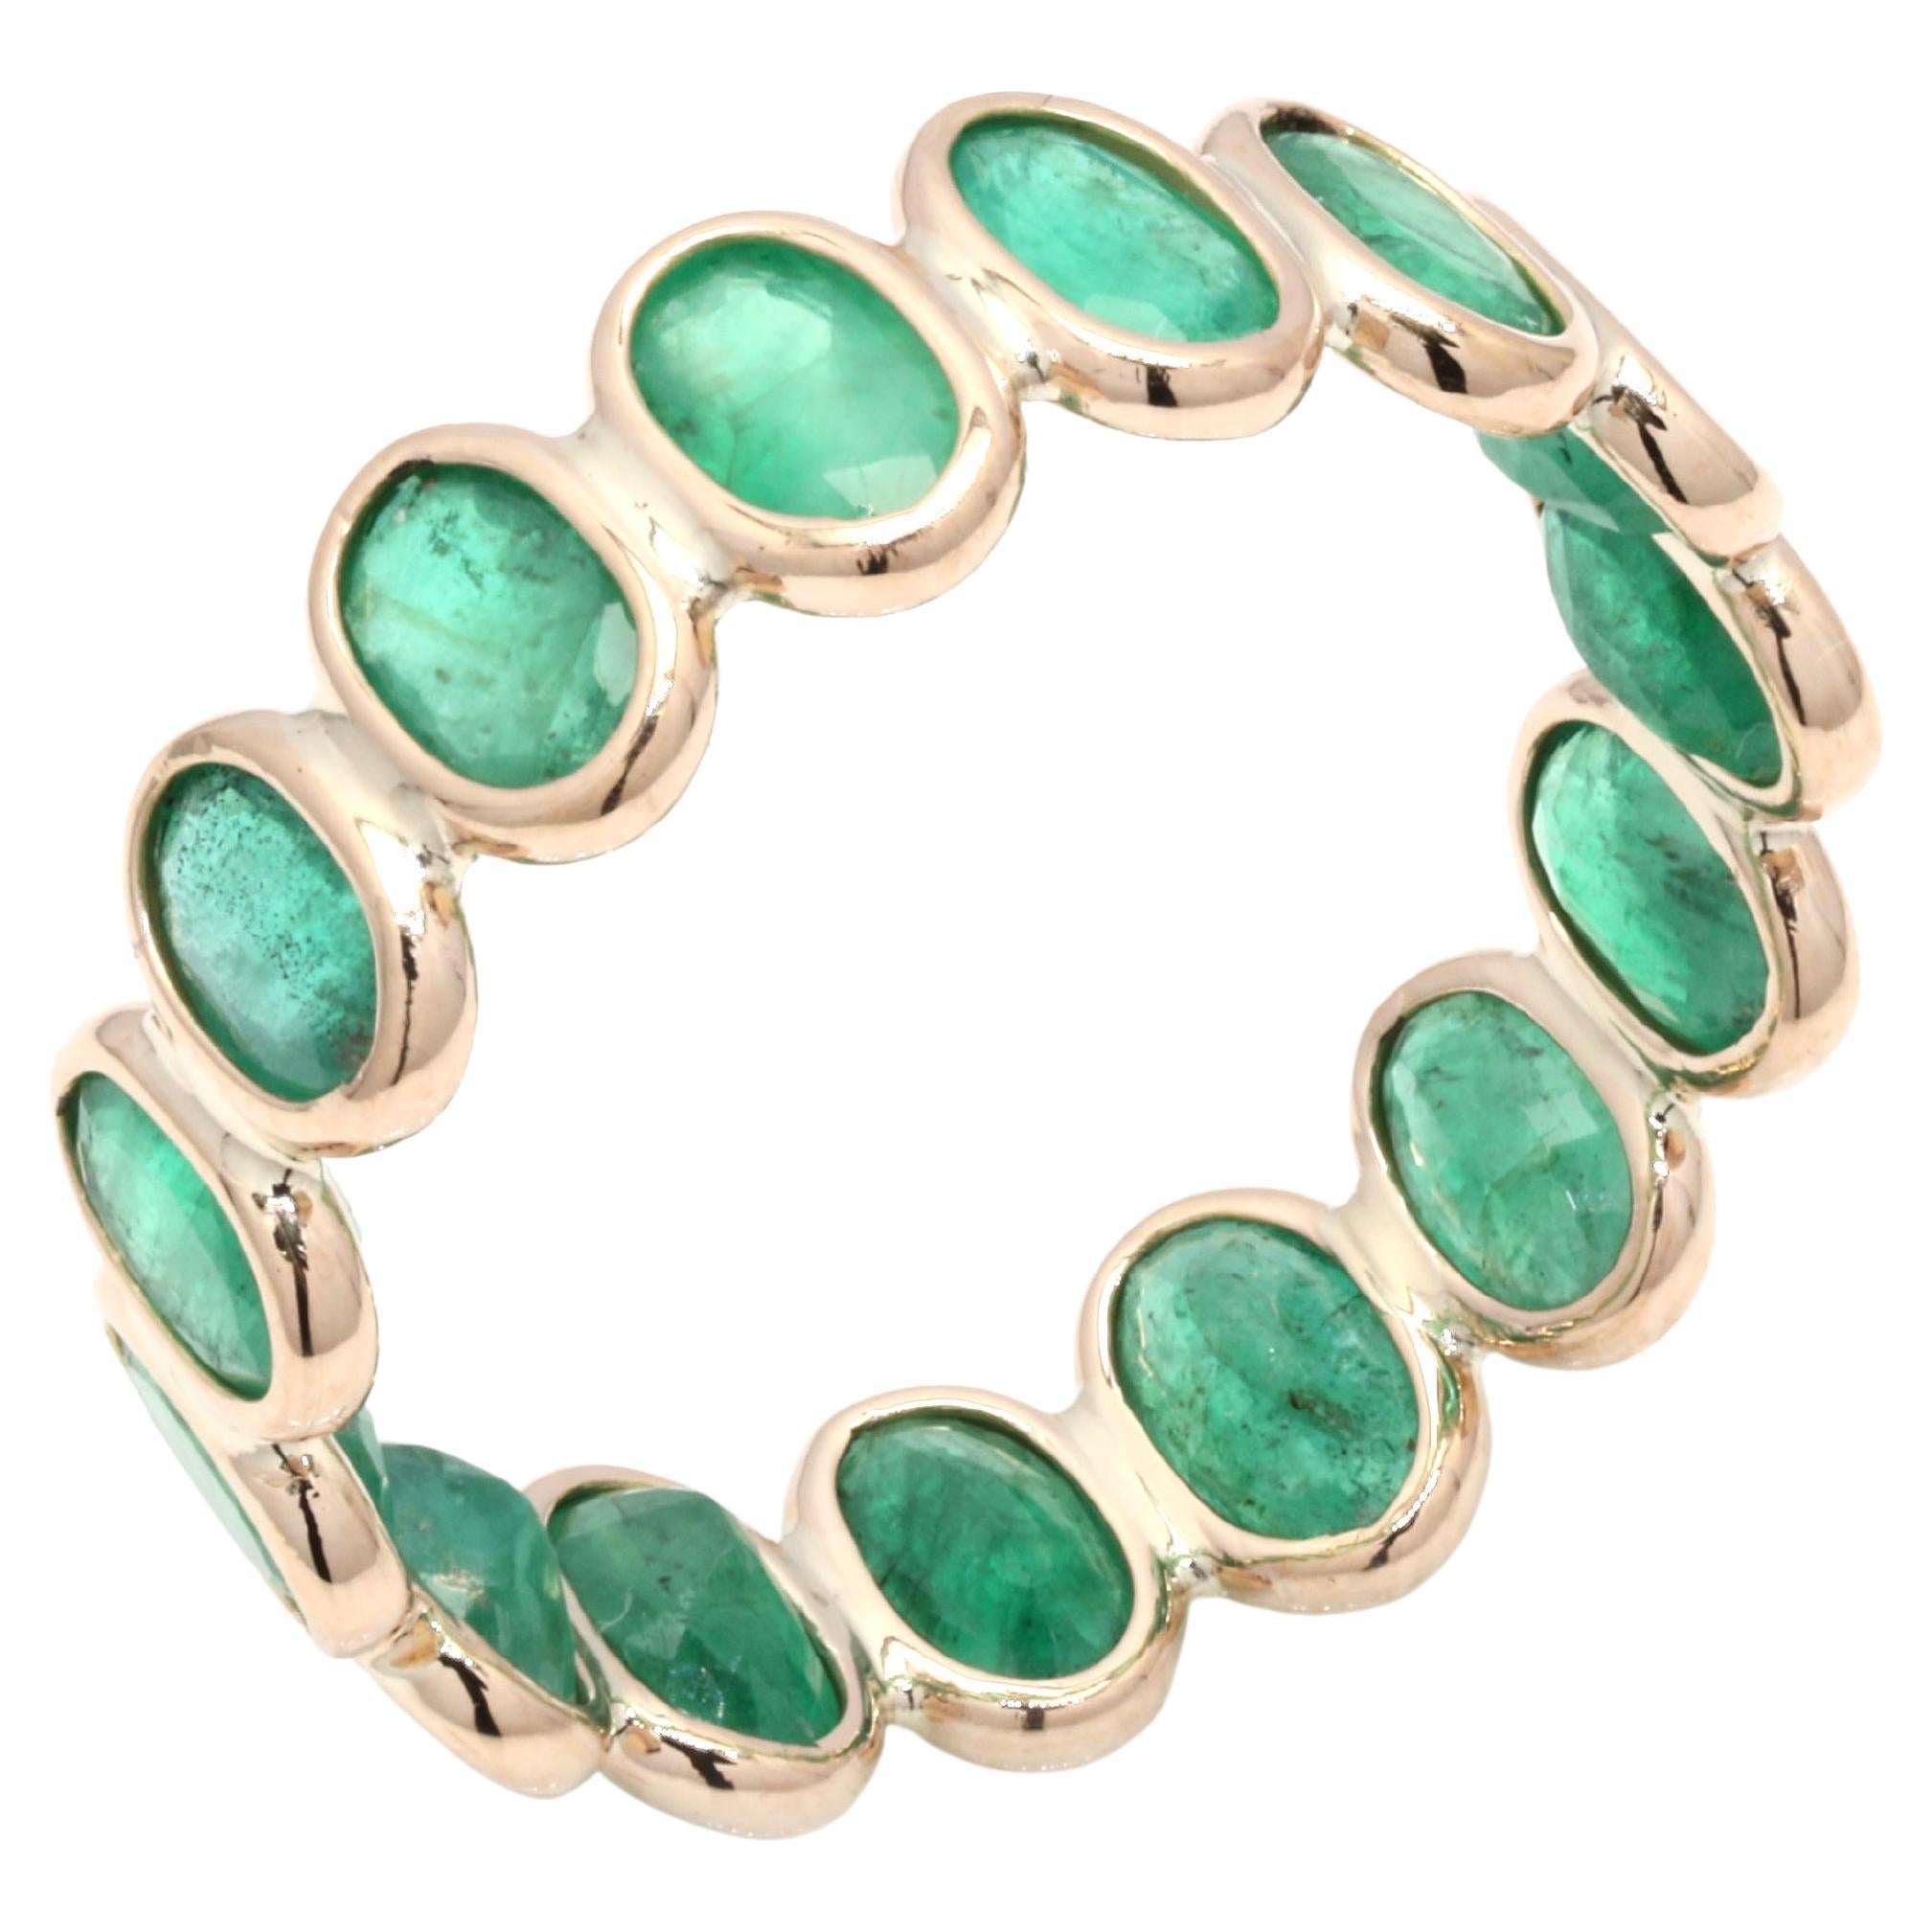 For Sale:  14 Karat Yellow Gold Eternity Ring with 3.41 Ct Oval Cut Natural Emerald